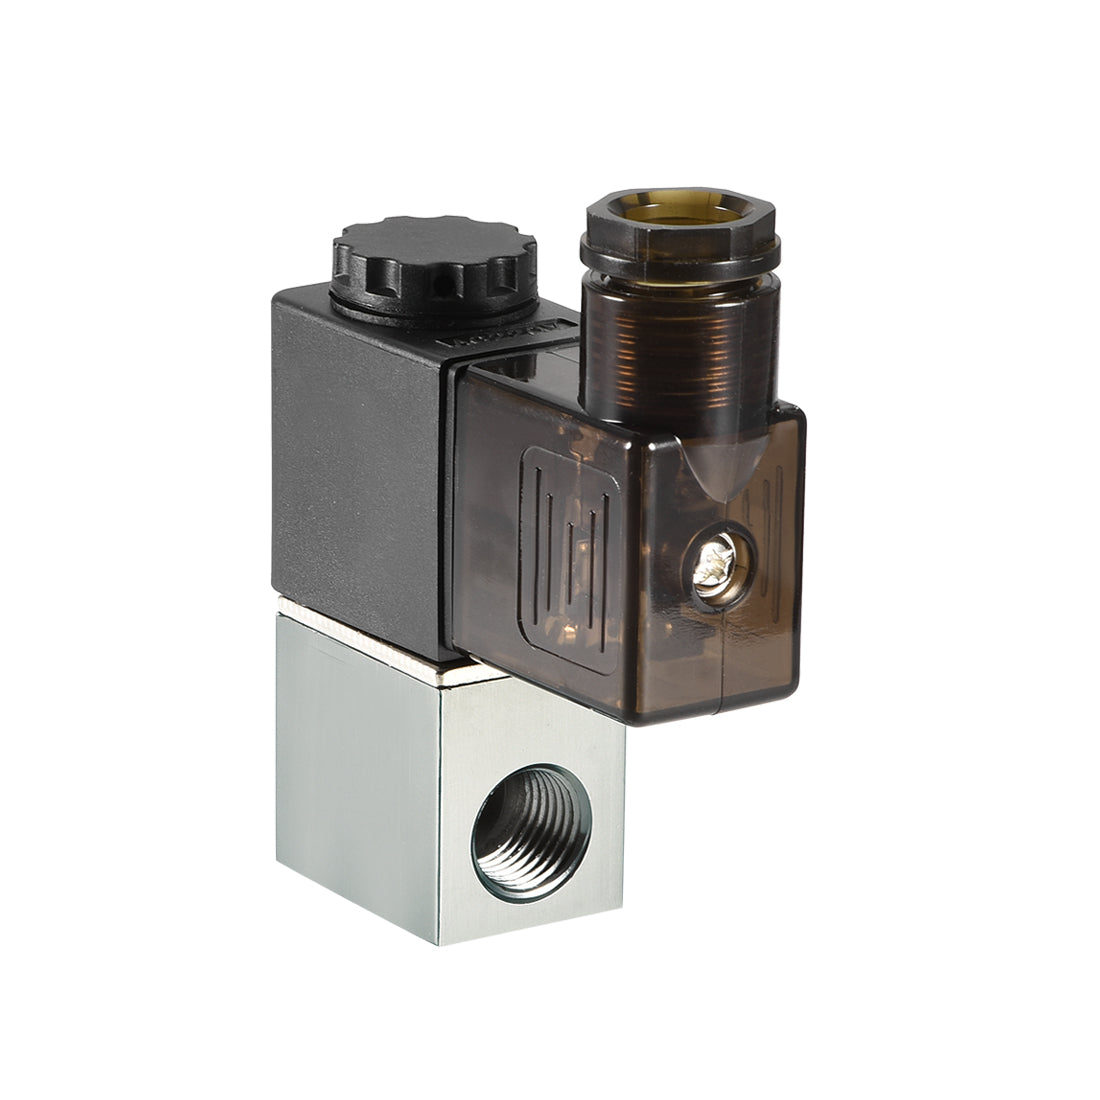 uxcell Uxcell 2V025-08 Pneumatic Air NC Single Electrical Control Solenoid Valve AC 24V 2 Way 2 Position 1/4" PT Internally Piloted Acting Type